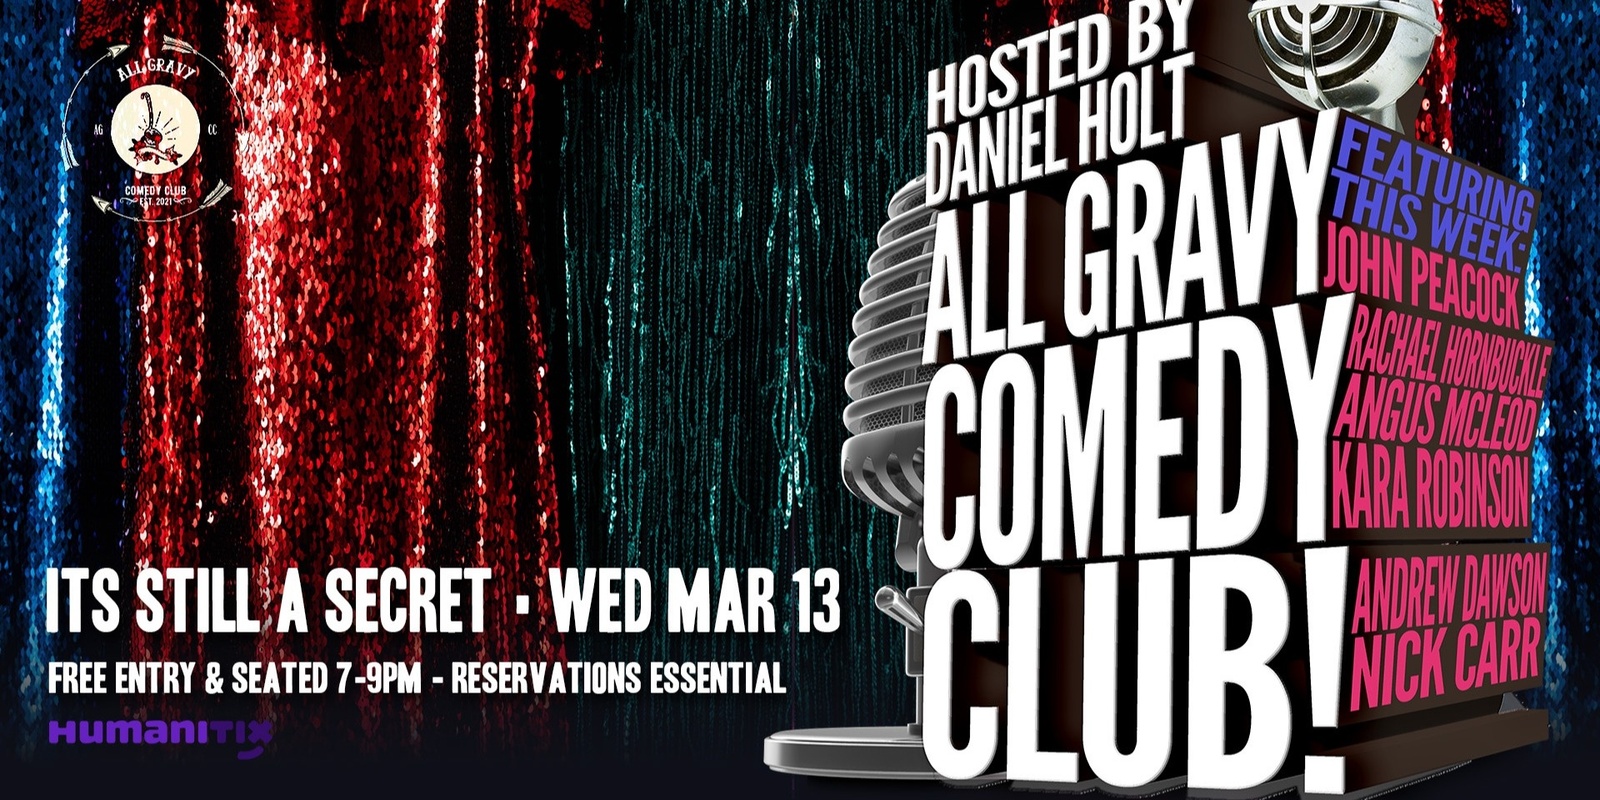 Banner image for All Gravy Comedy Club